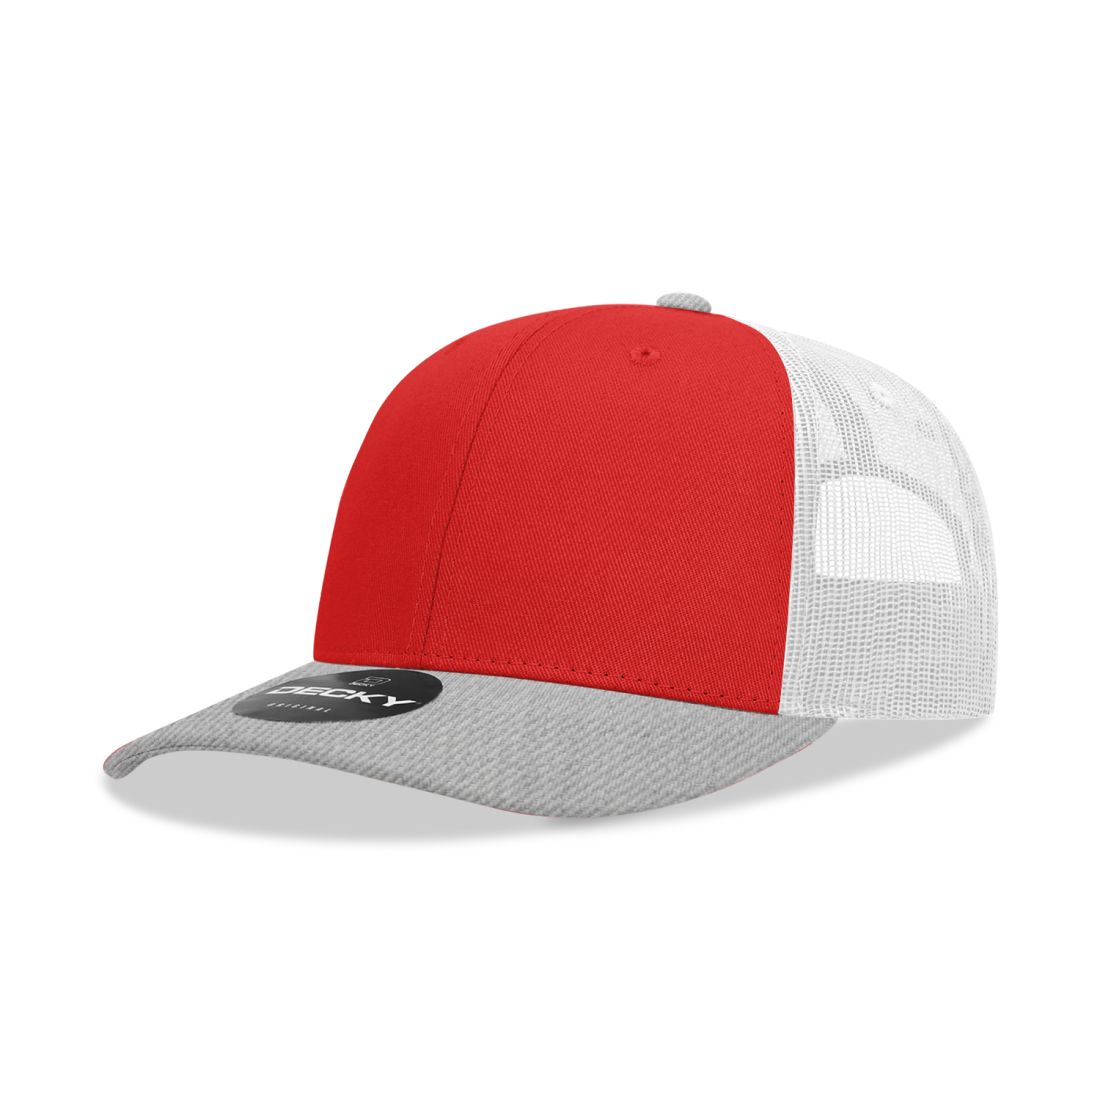 Heather Grey/Red/White color variant